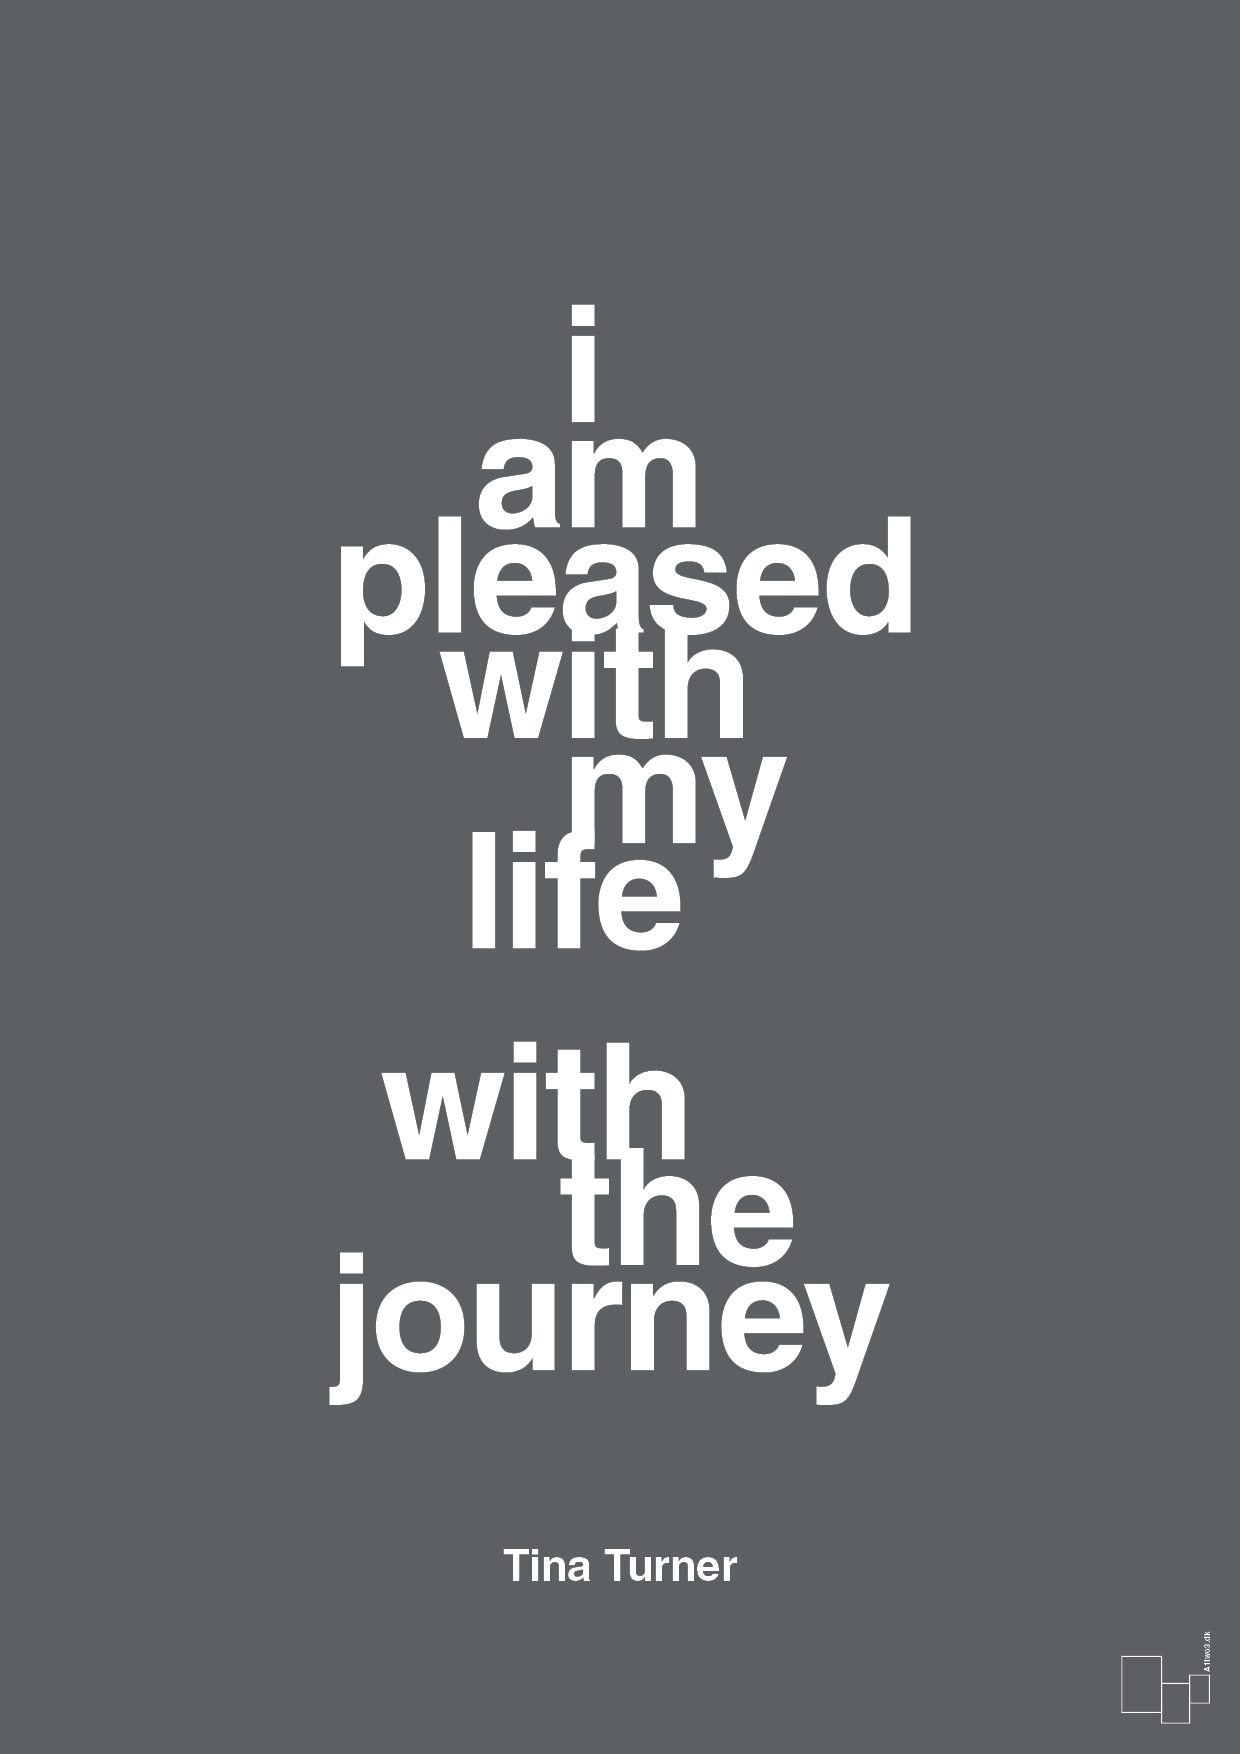 i am pleased with my life with the journey - Plakat med Citater i Graphic Charcoal